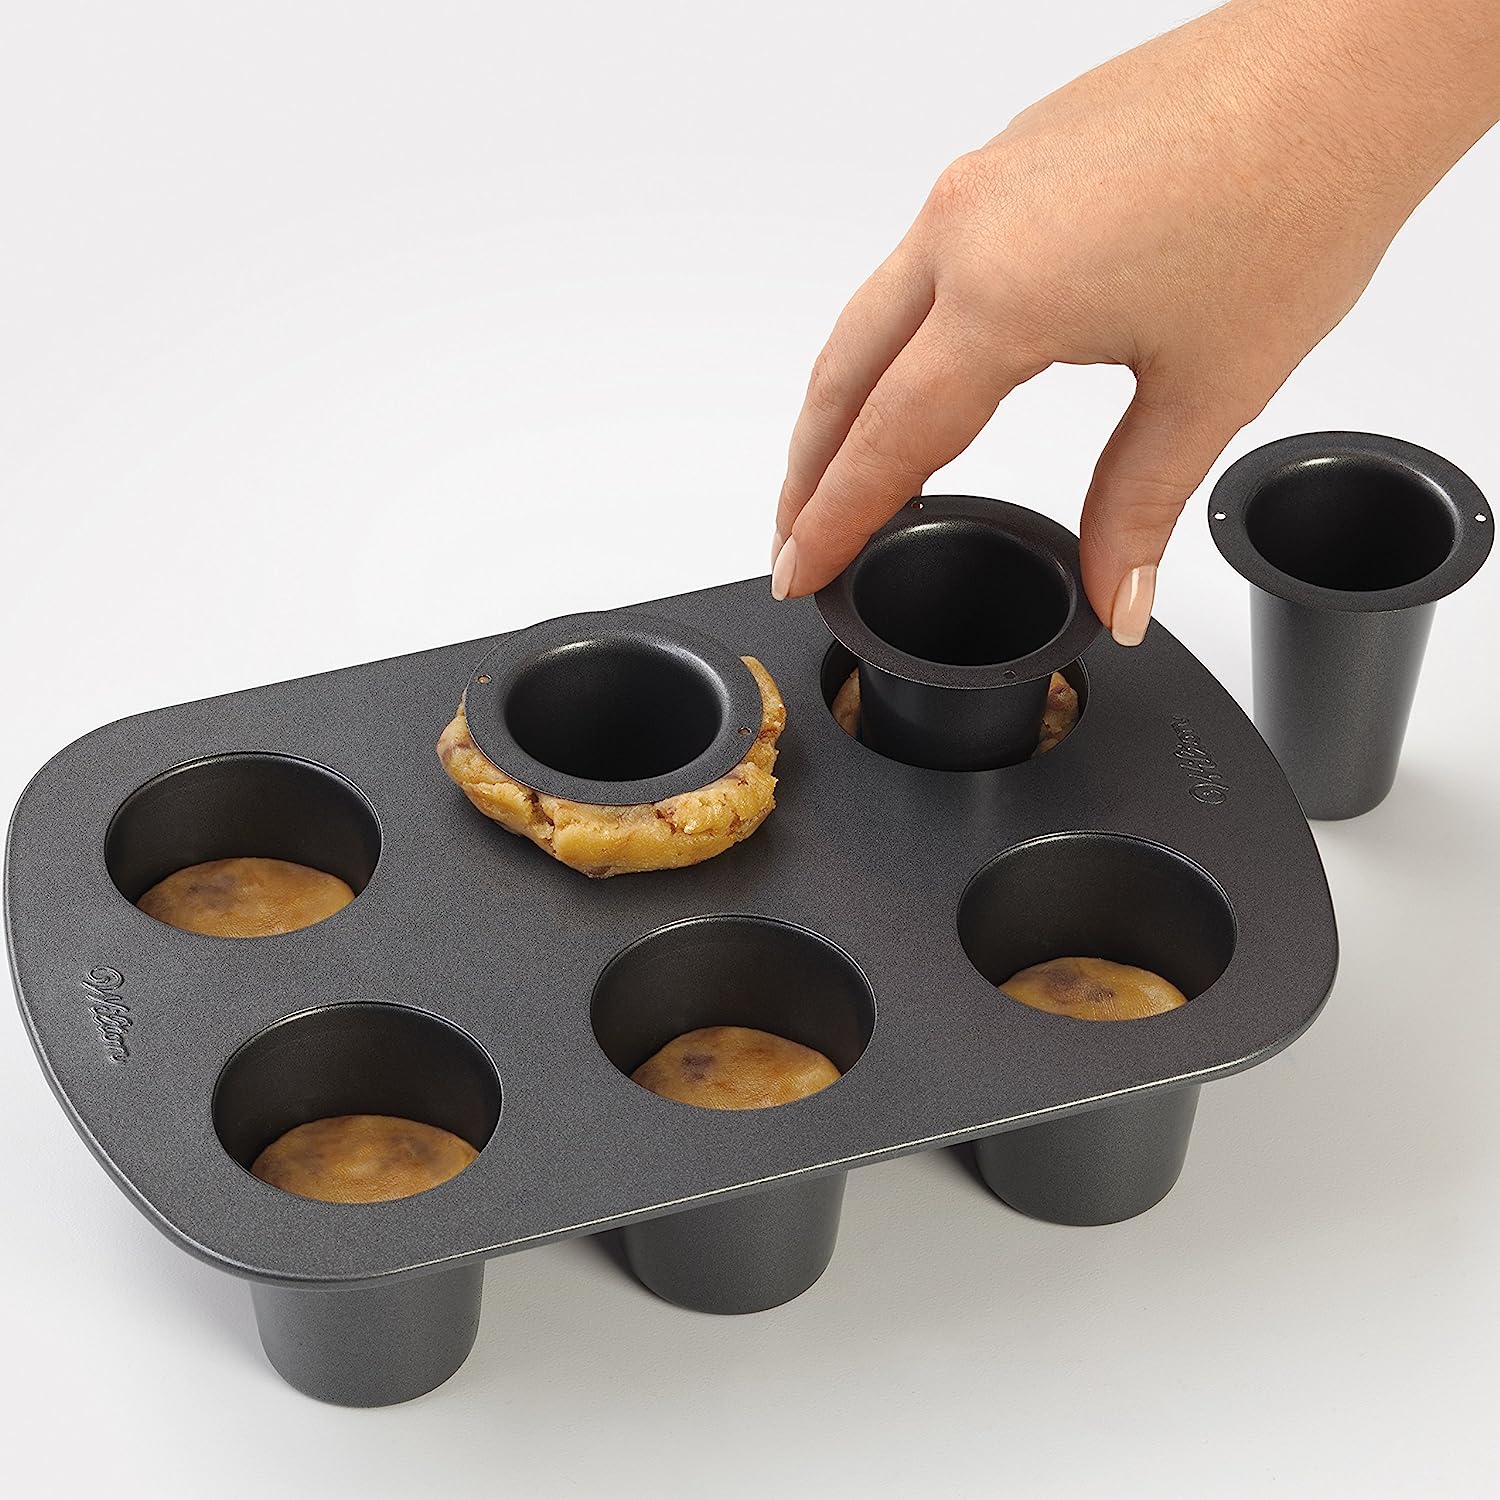 A cookie shot glass baking pan. A person's hand is using the pan to make cookie shot glasses.